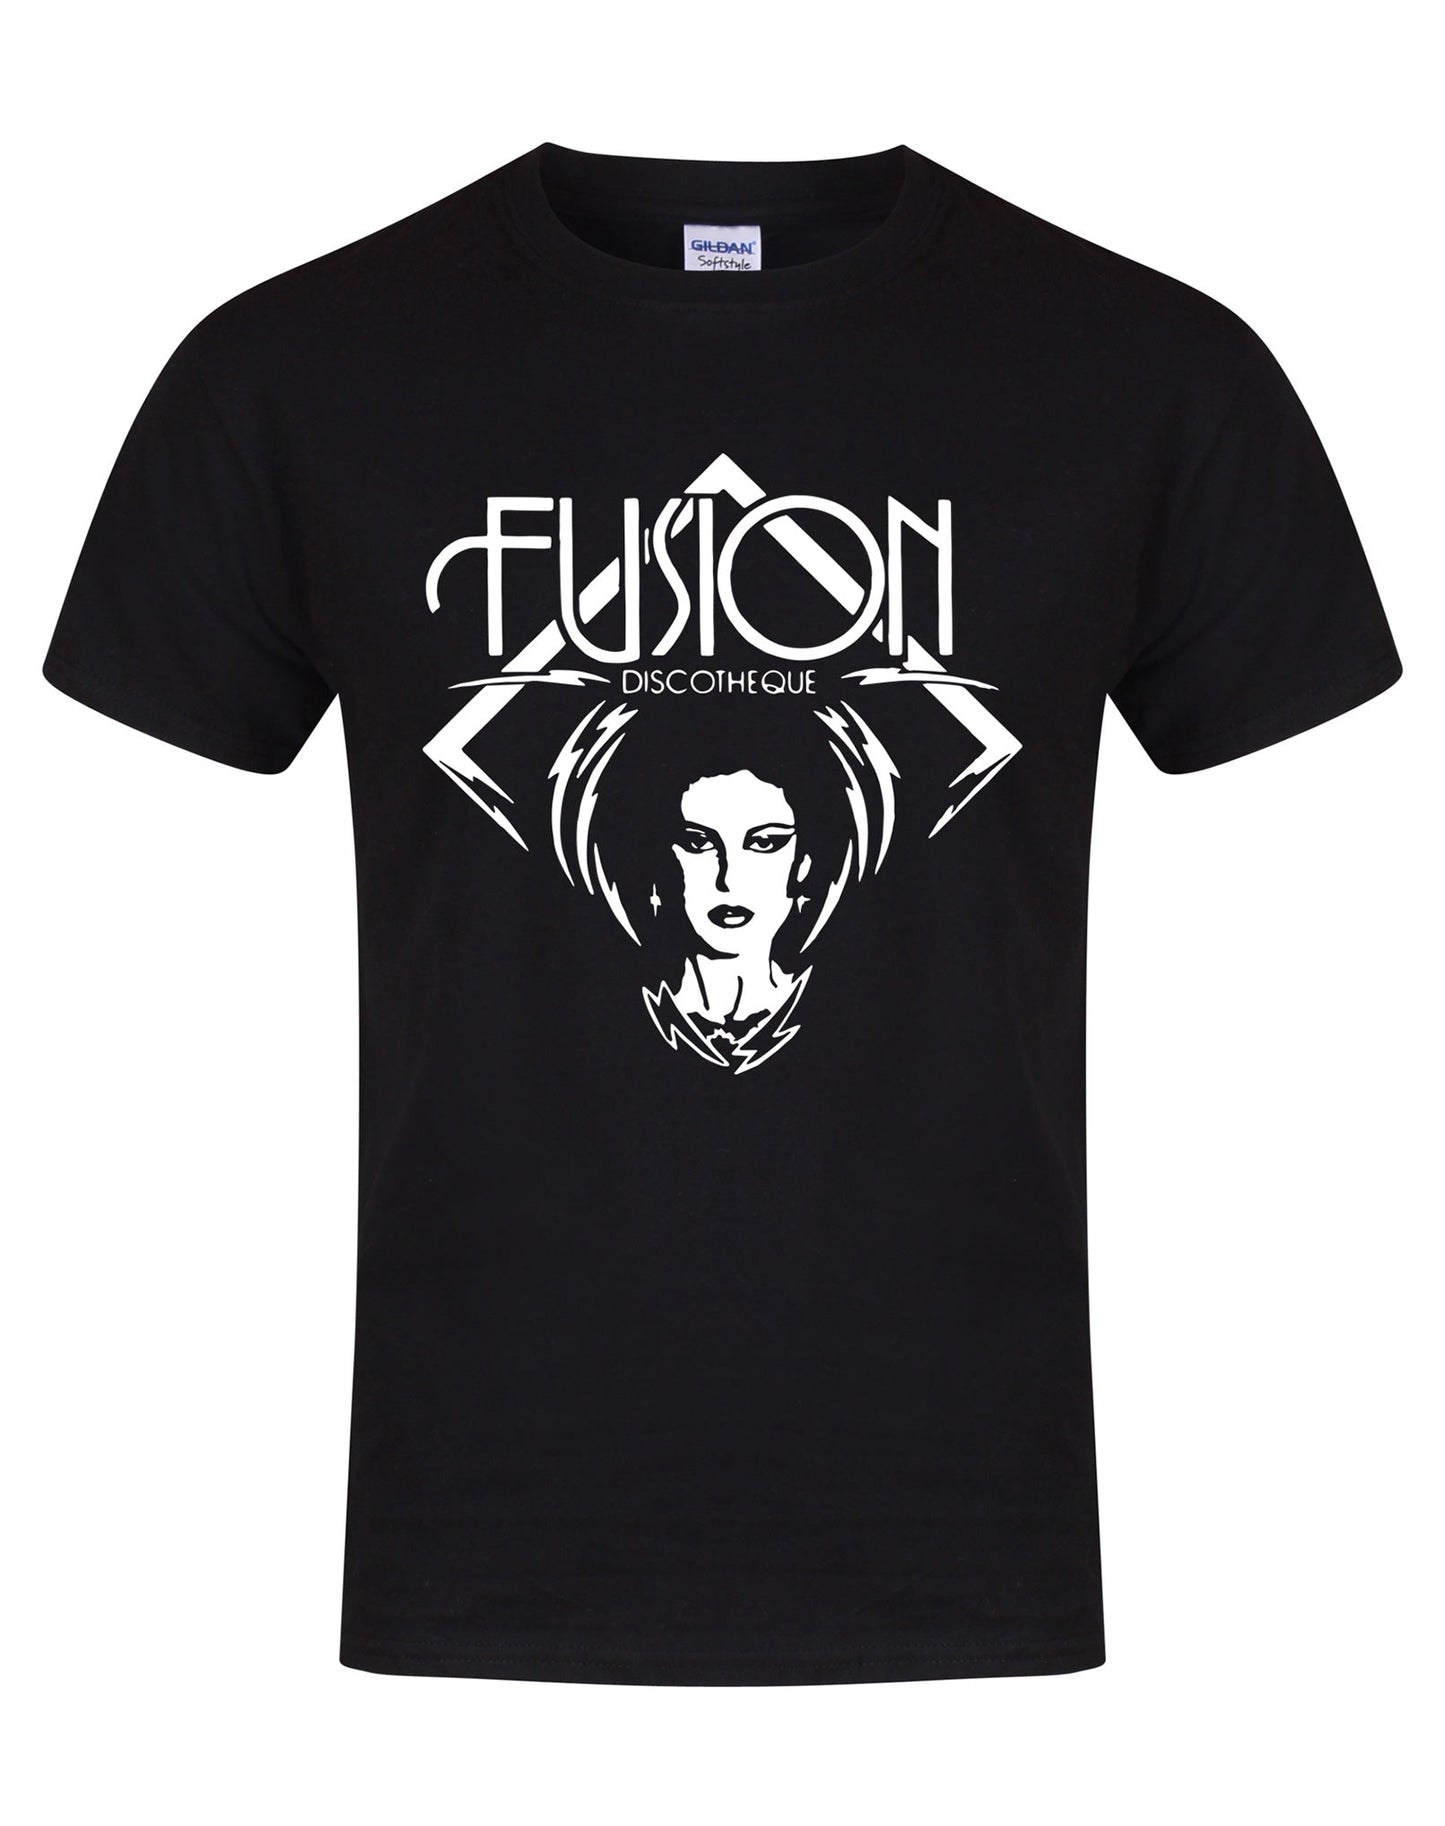 Fusion unisex fit T-shirt - various colours - Dirty Stop Outs